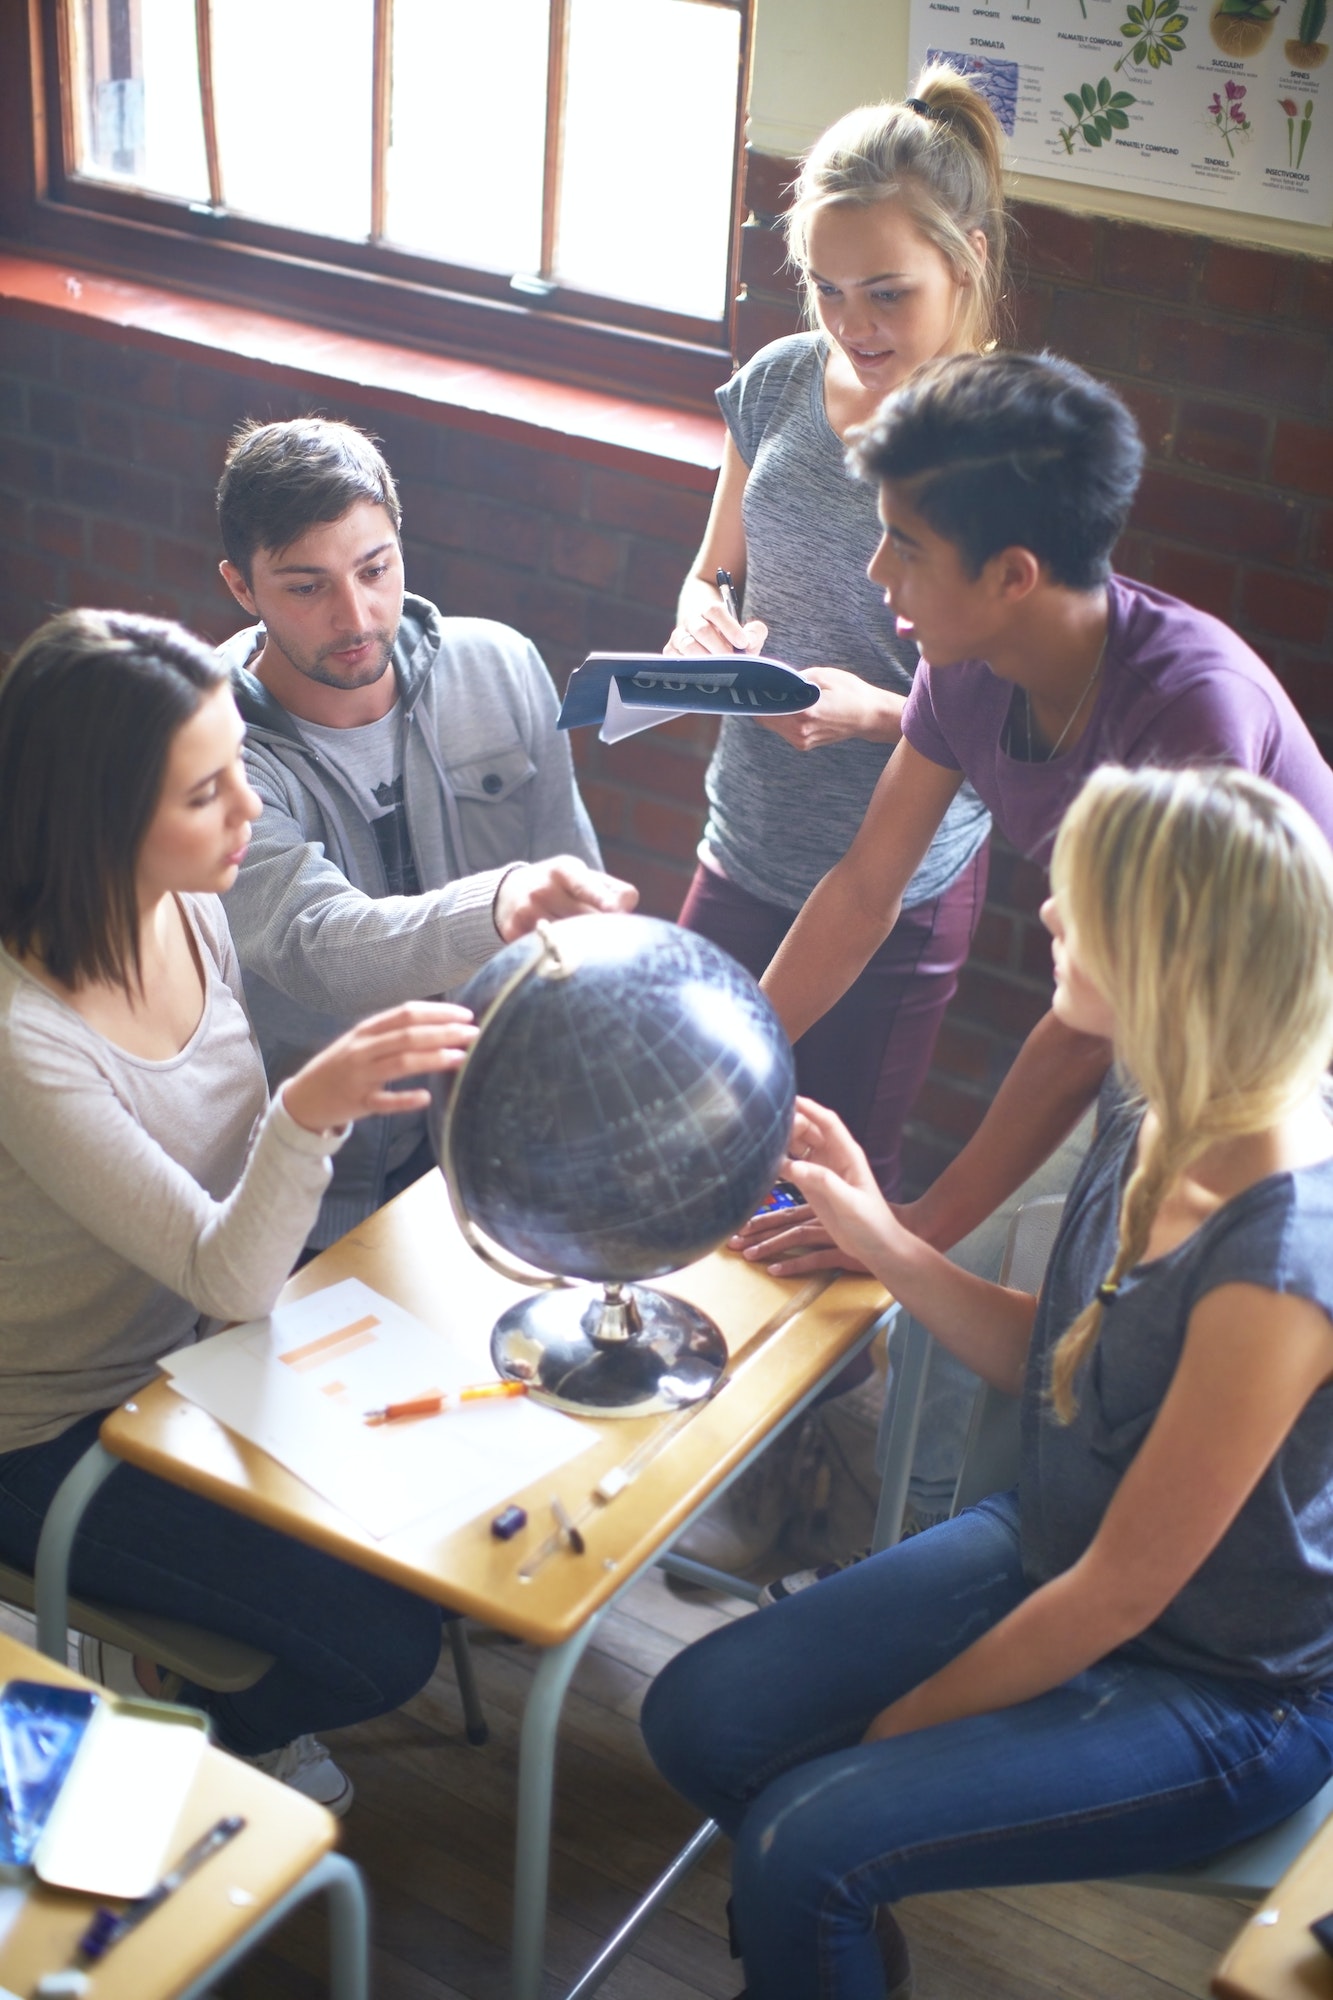 Students in classroom with globe